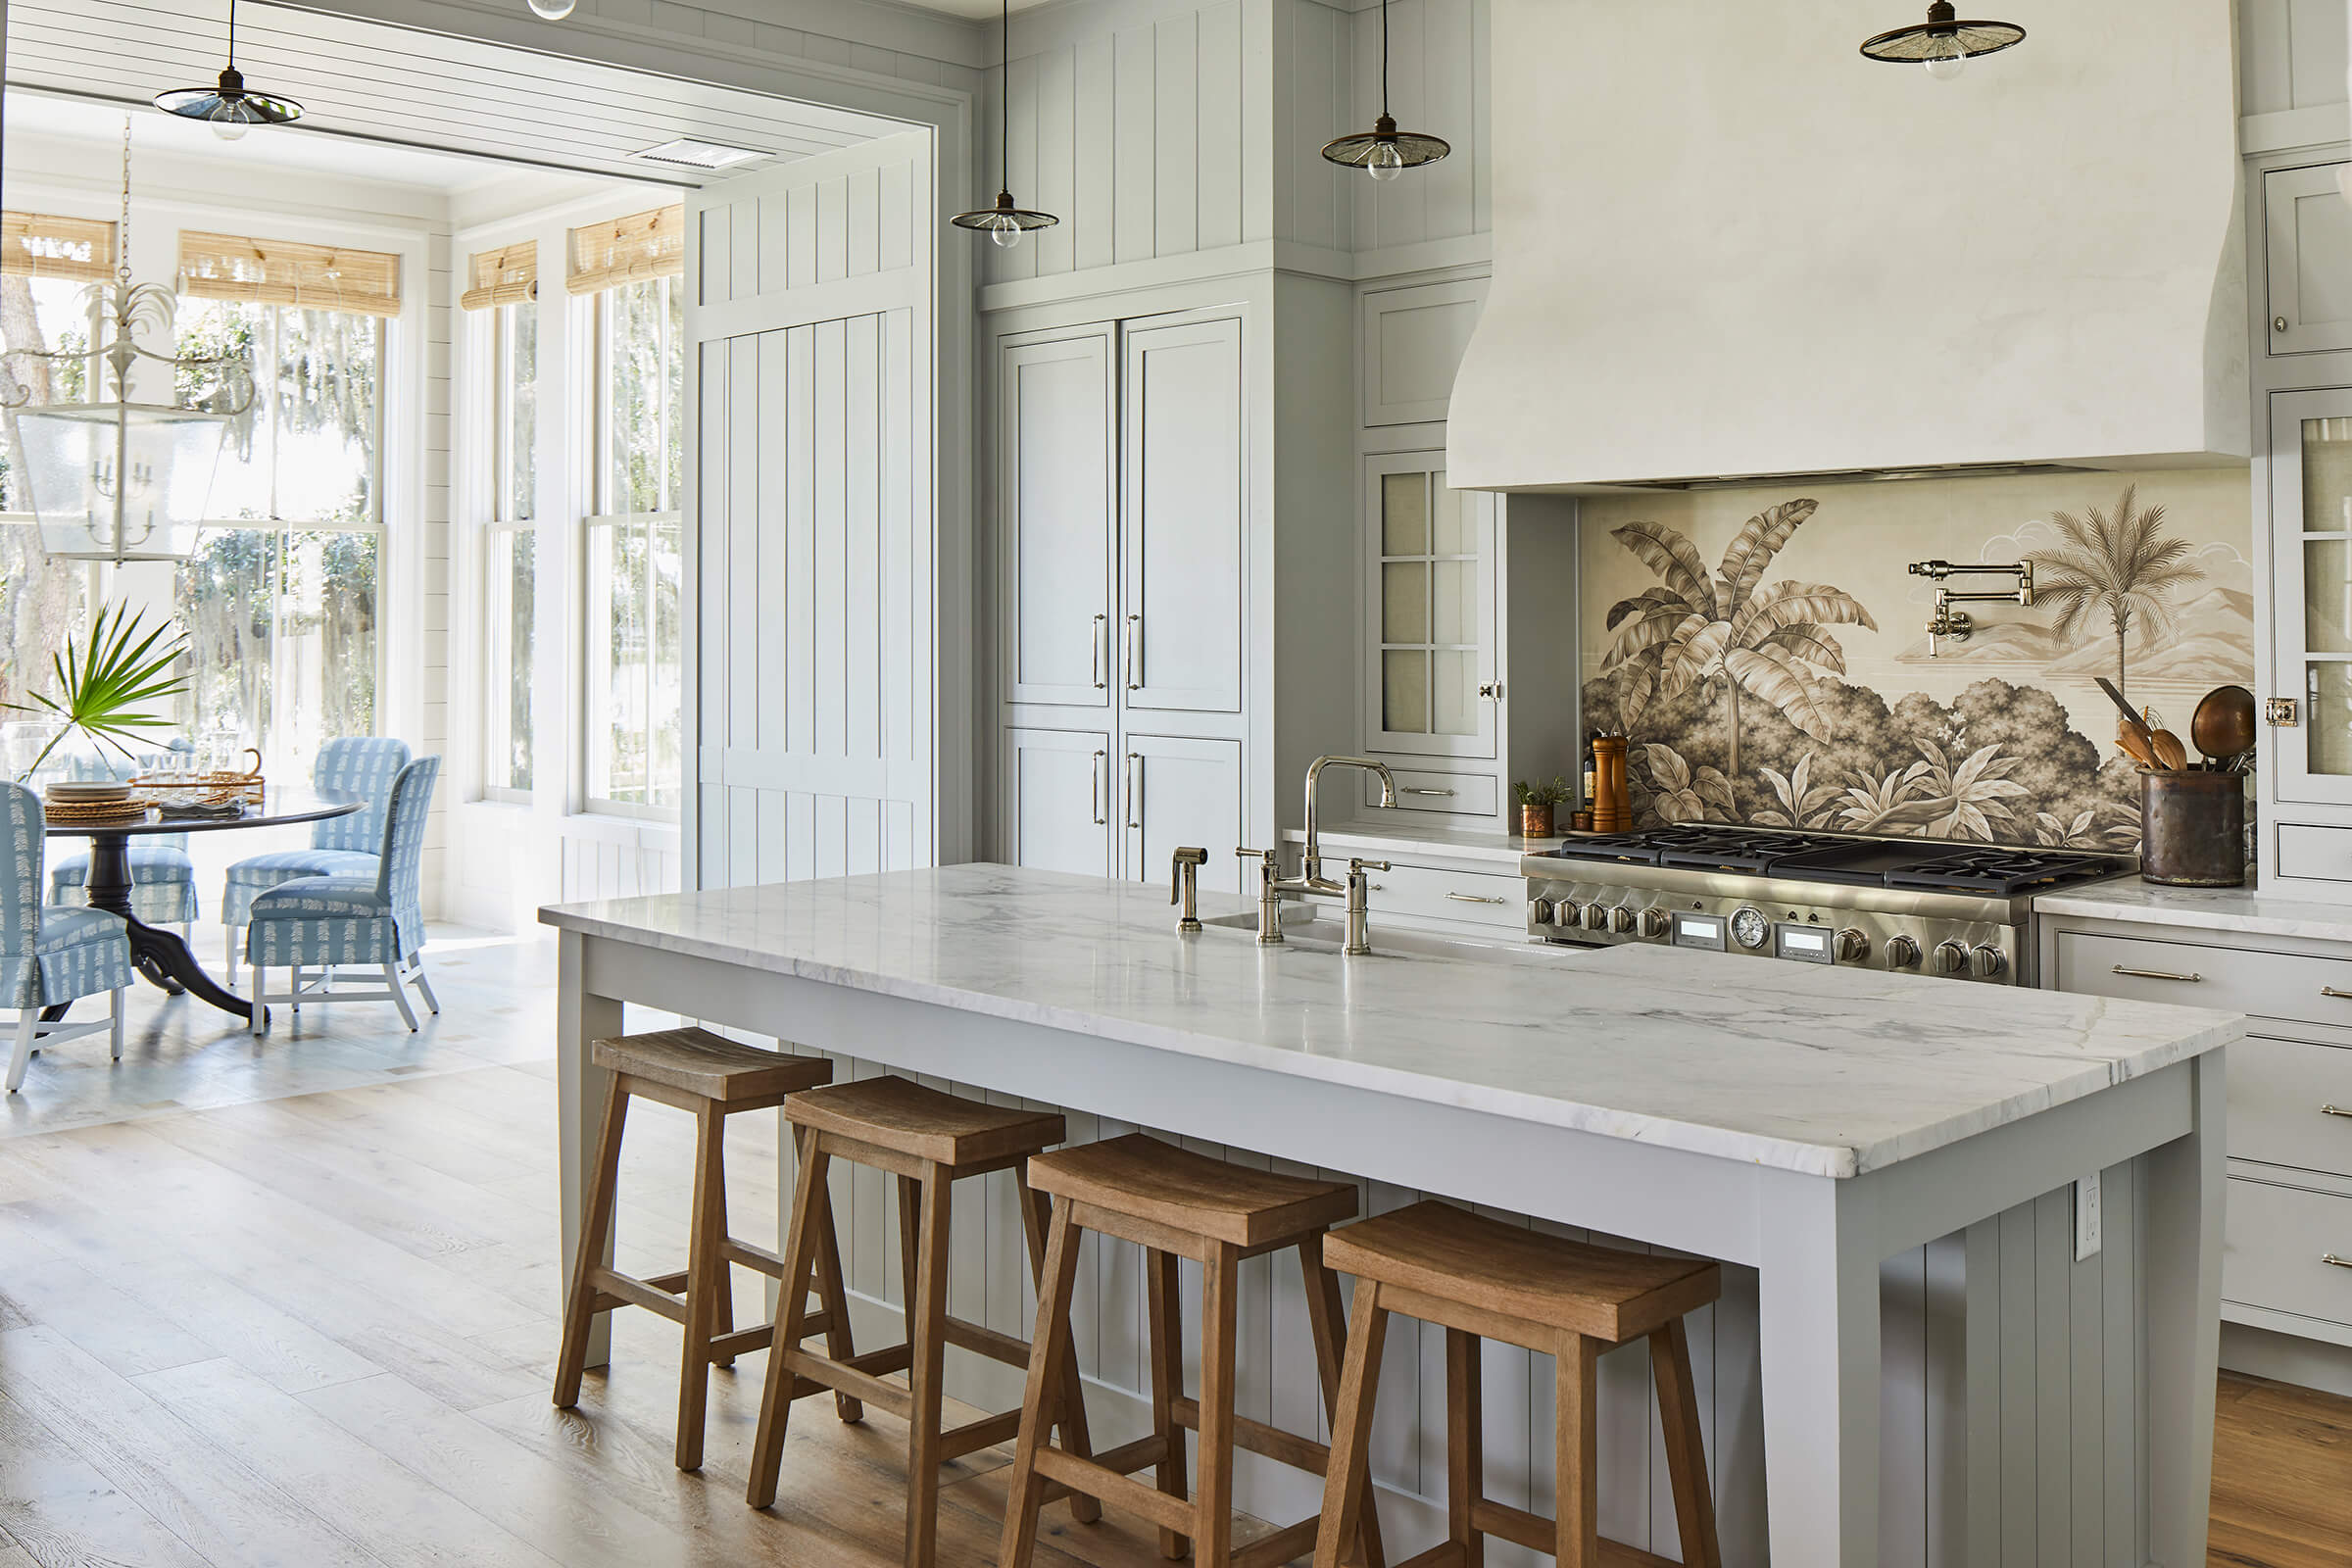 The kitchen of the 2019 Southern Living Showhouse featuring Marvin windows and doors.